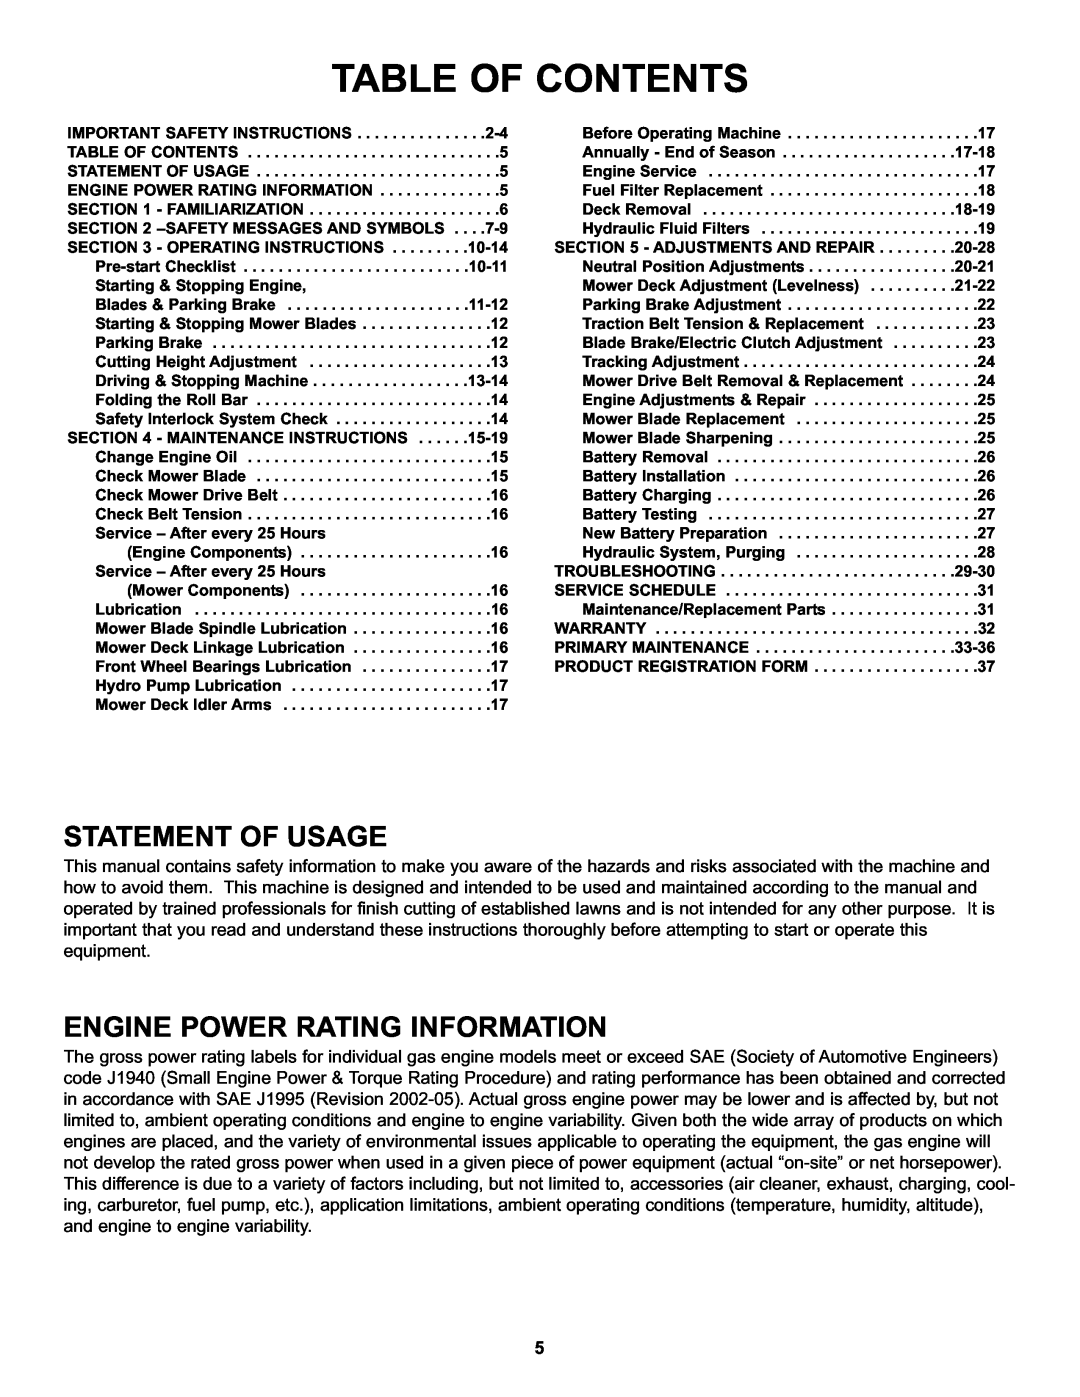 Snapper NZMX30614KH, NZMX32734BV specifications Statement Of Usage, Engine Power Rating Information, Table Of Contents 